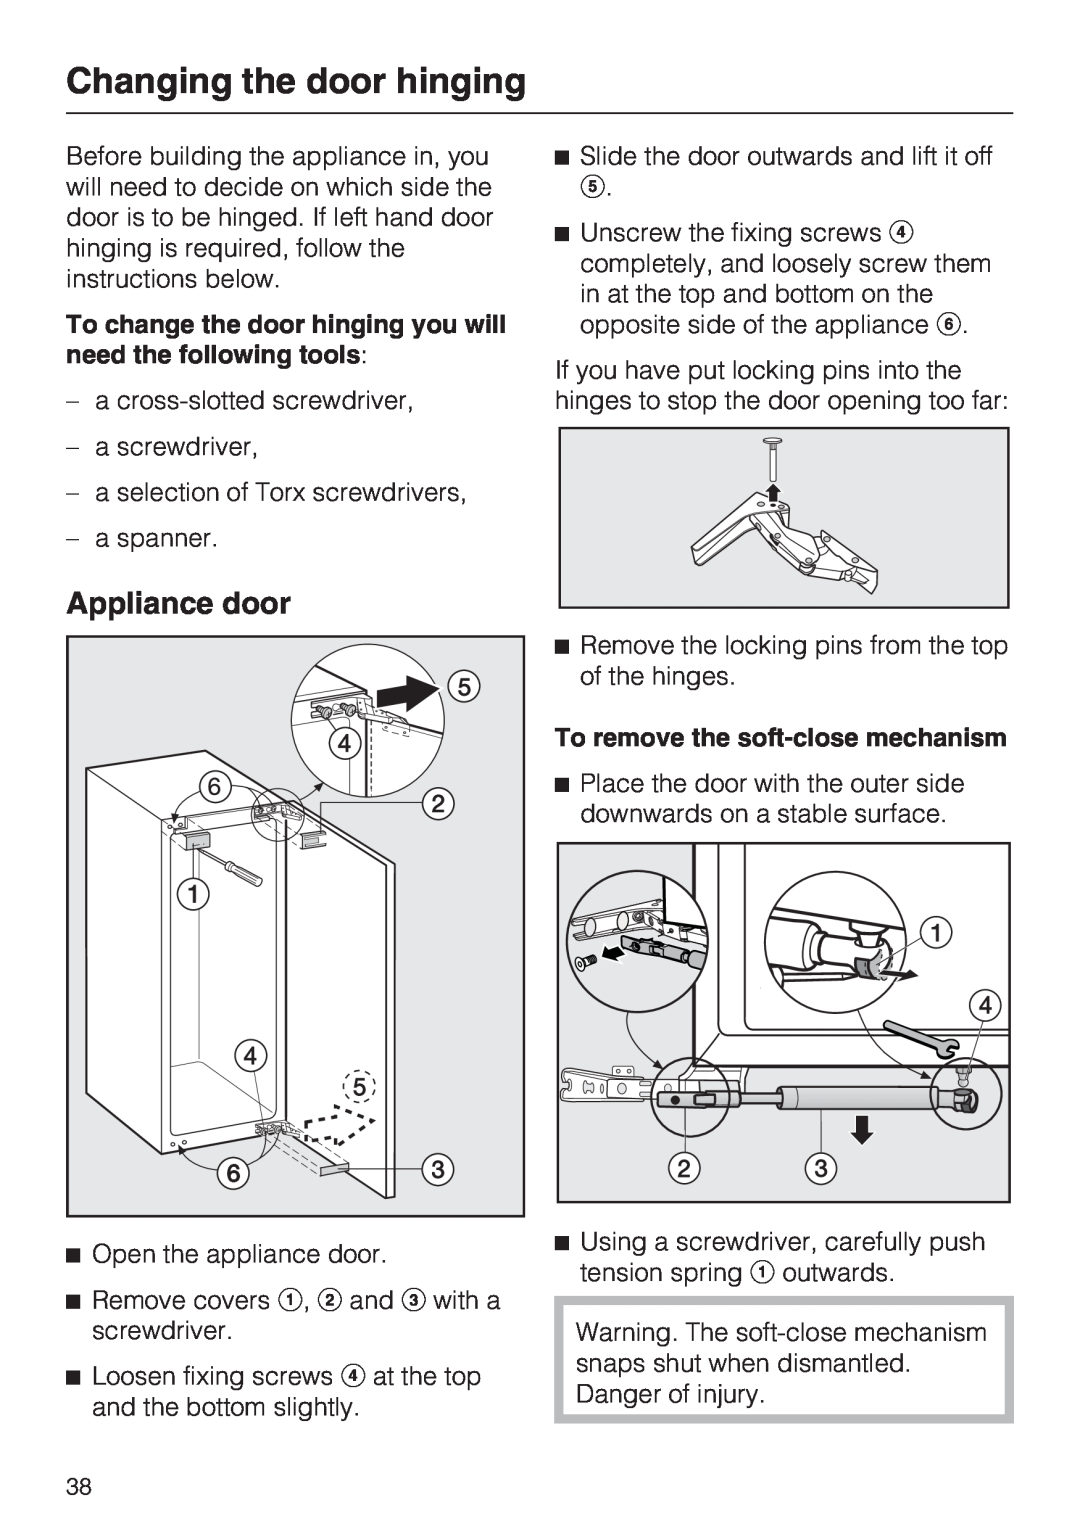 Miele K9752, K9552 installation instructions Changing the door hinging, Appliance door, To remove the soft-closemechanism 